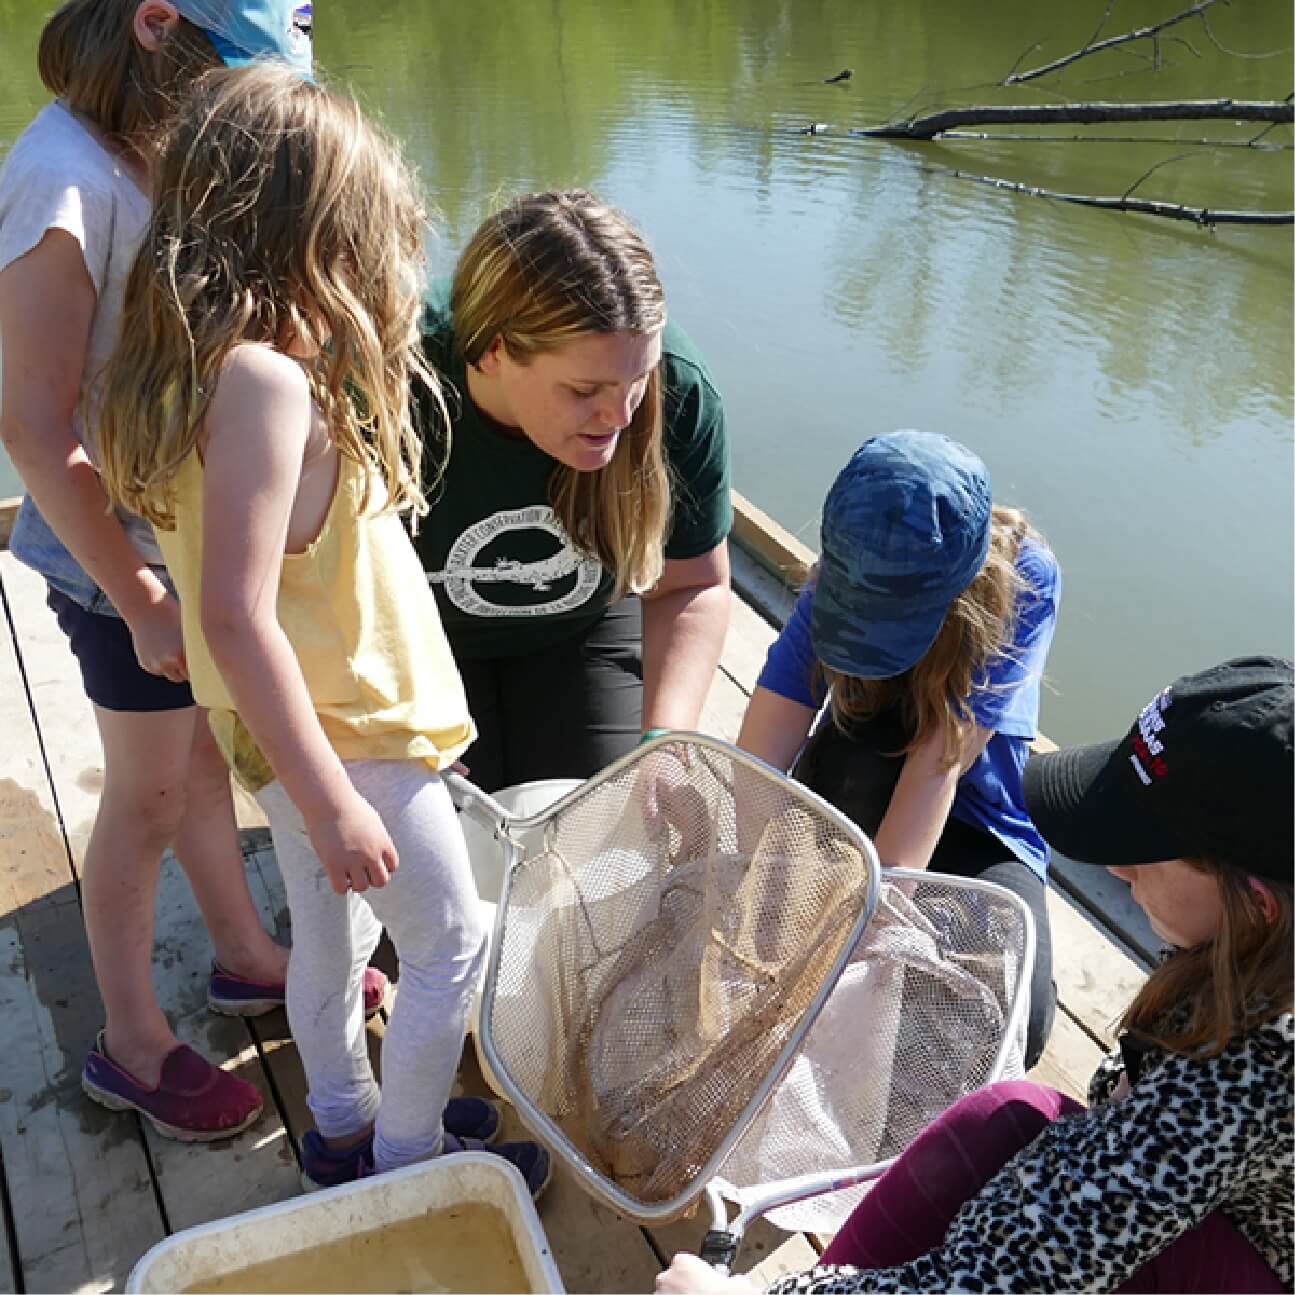 Our Featured Partners.  Click here to learn more about the Rideau Valley Conservation Authority organization that provides hands-on watershed restoration and nature experiences for youth.